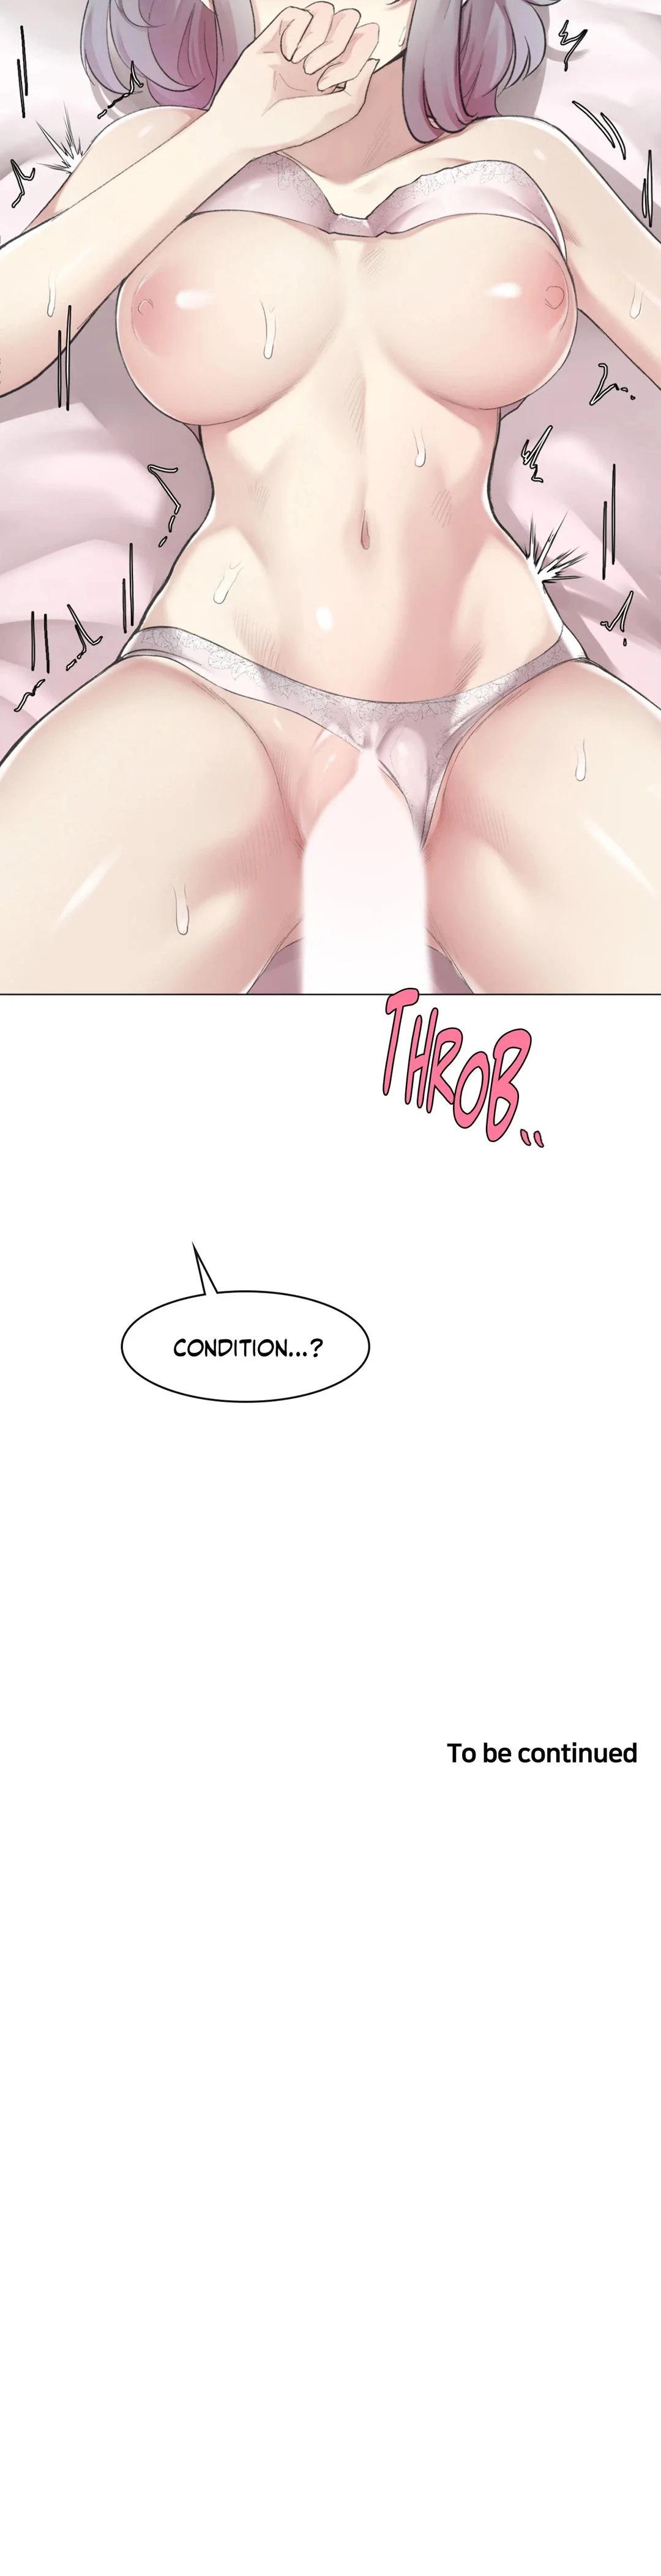 [Dumangoon, KONG_] Sexcape Room: Snap Off Ch.7/7 [English] [Manhwa PDF] Completed 104